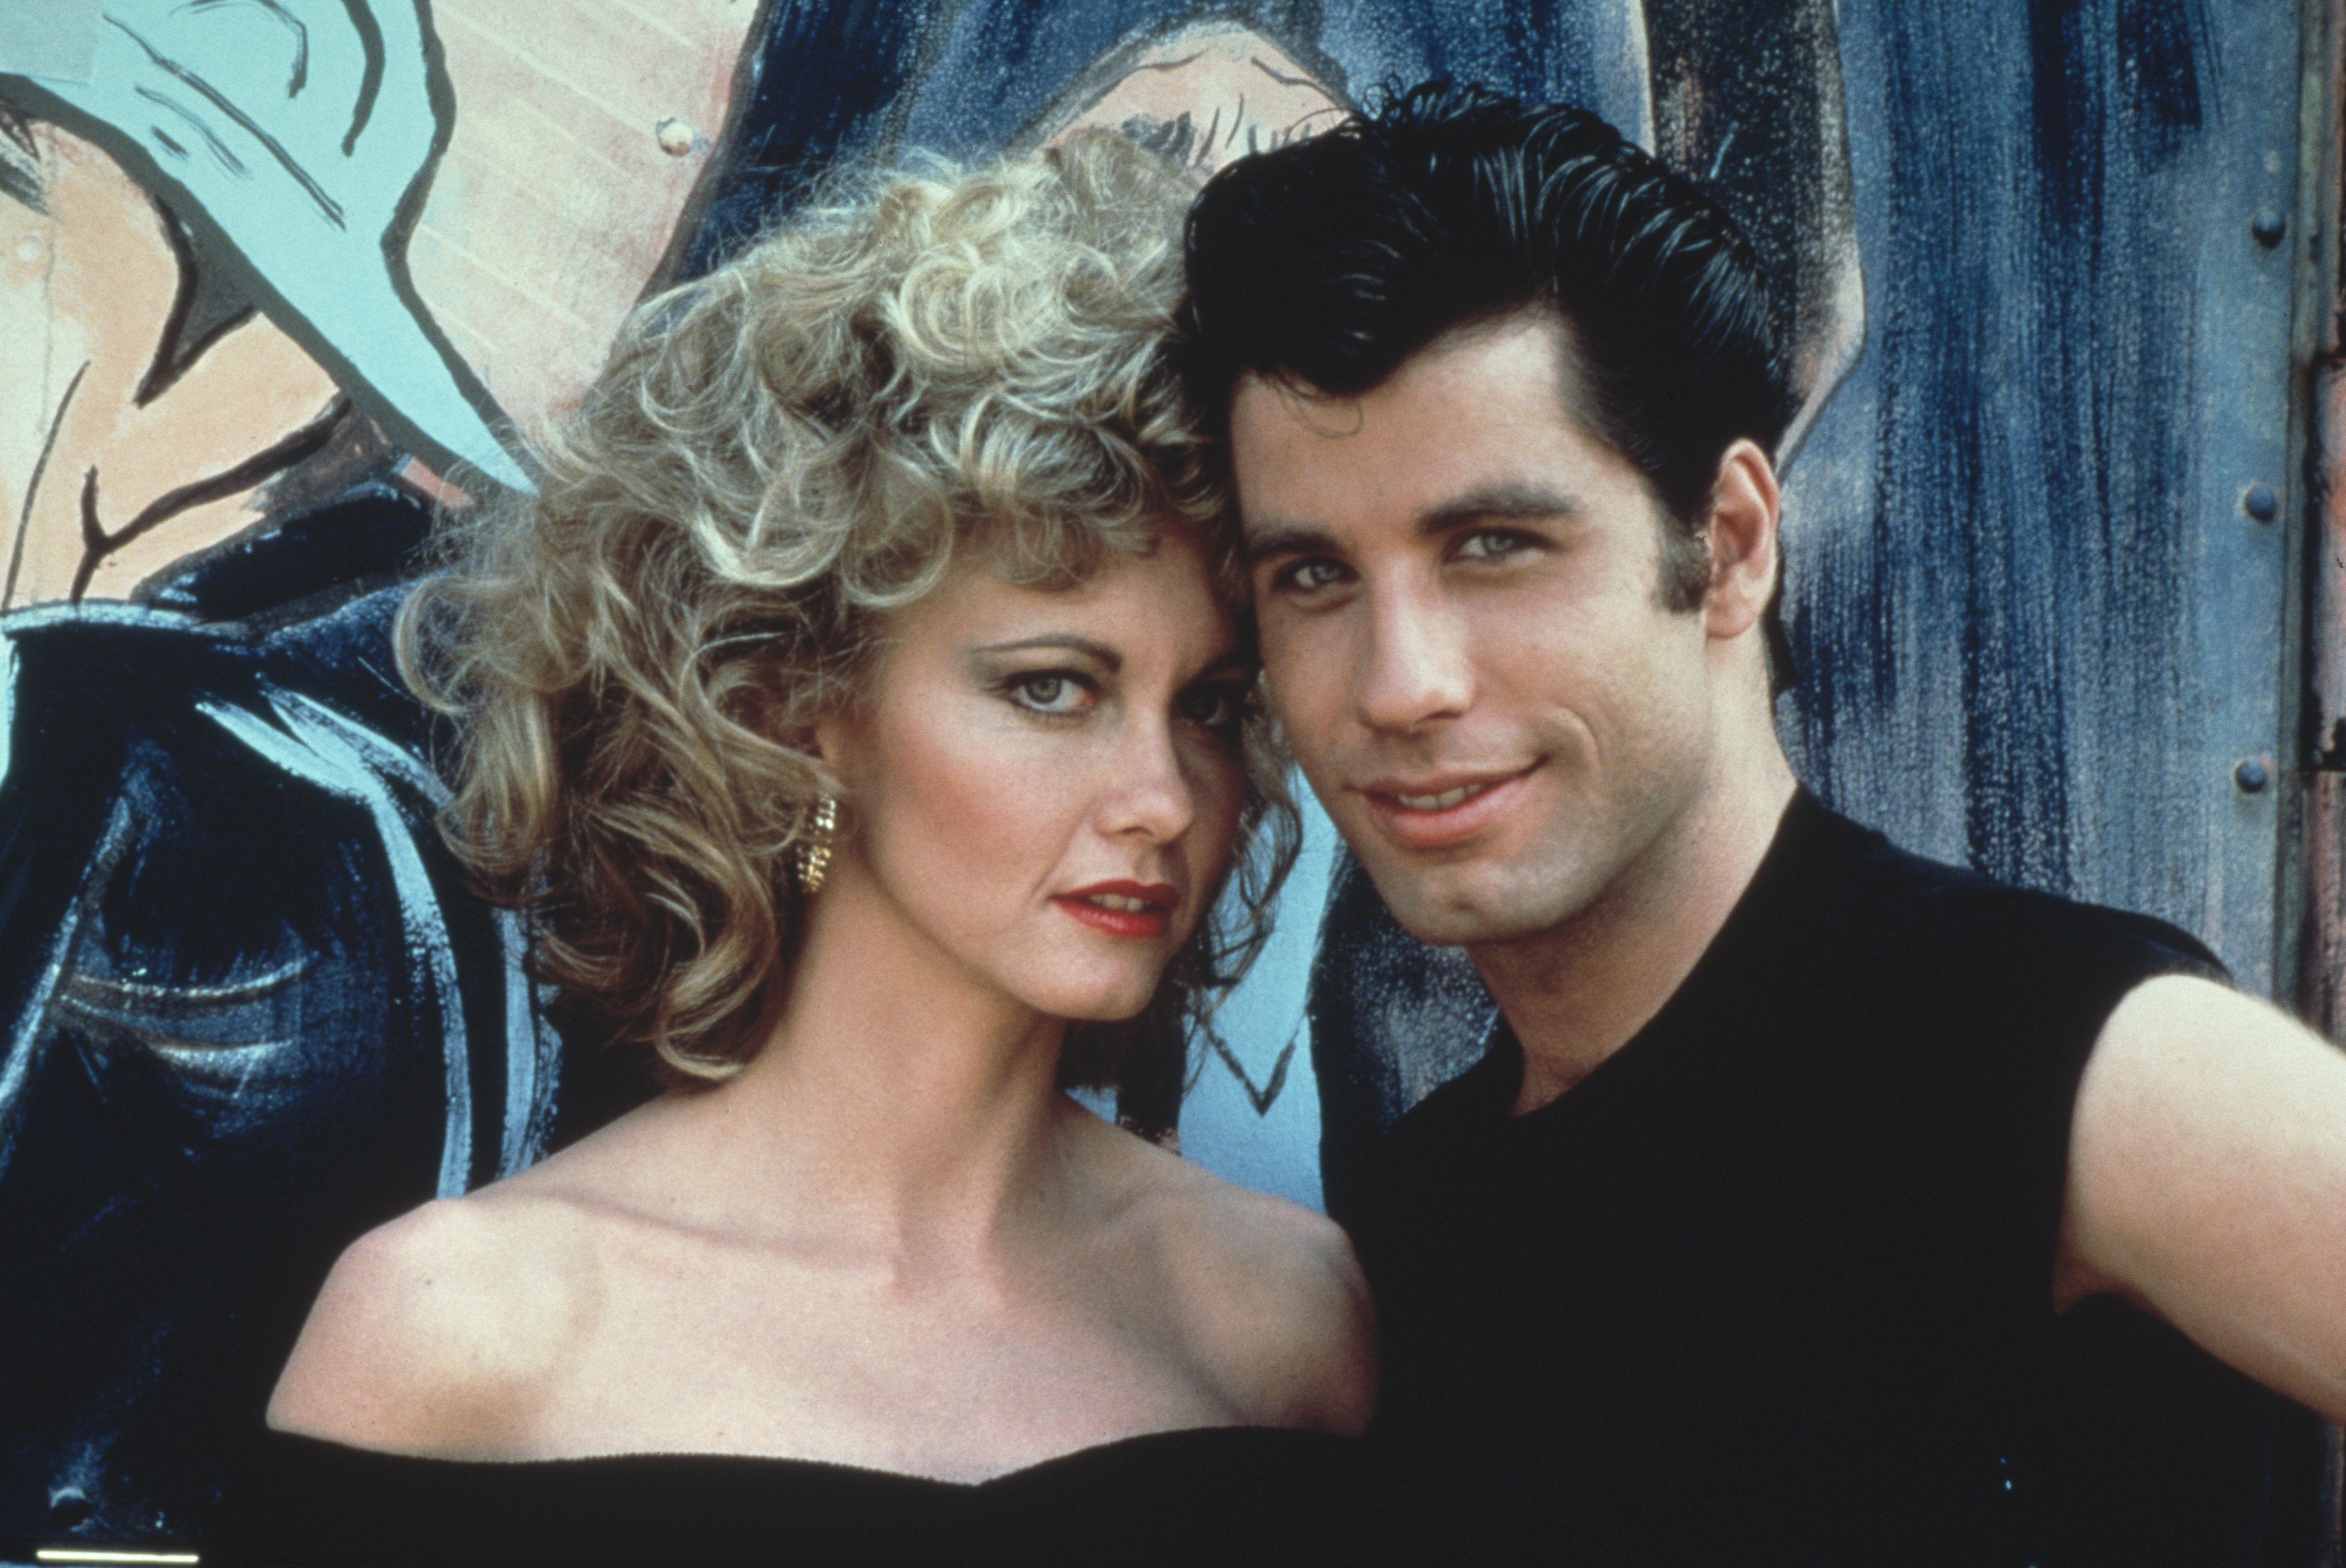 Olivia Newton-John and John Travolta as they appear in the Paramount film "Grease," 1978. | Source: Getty Images